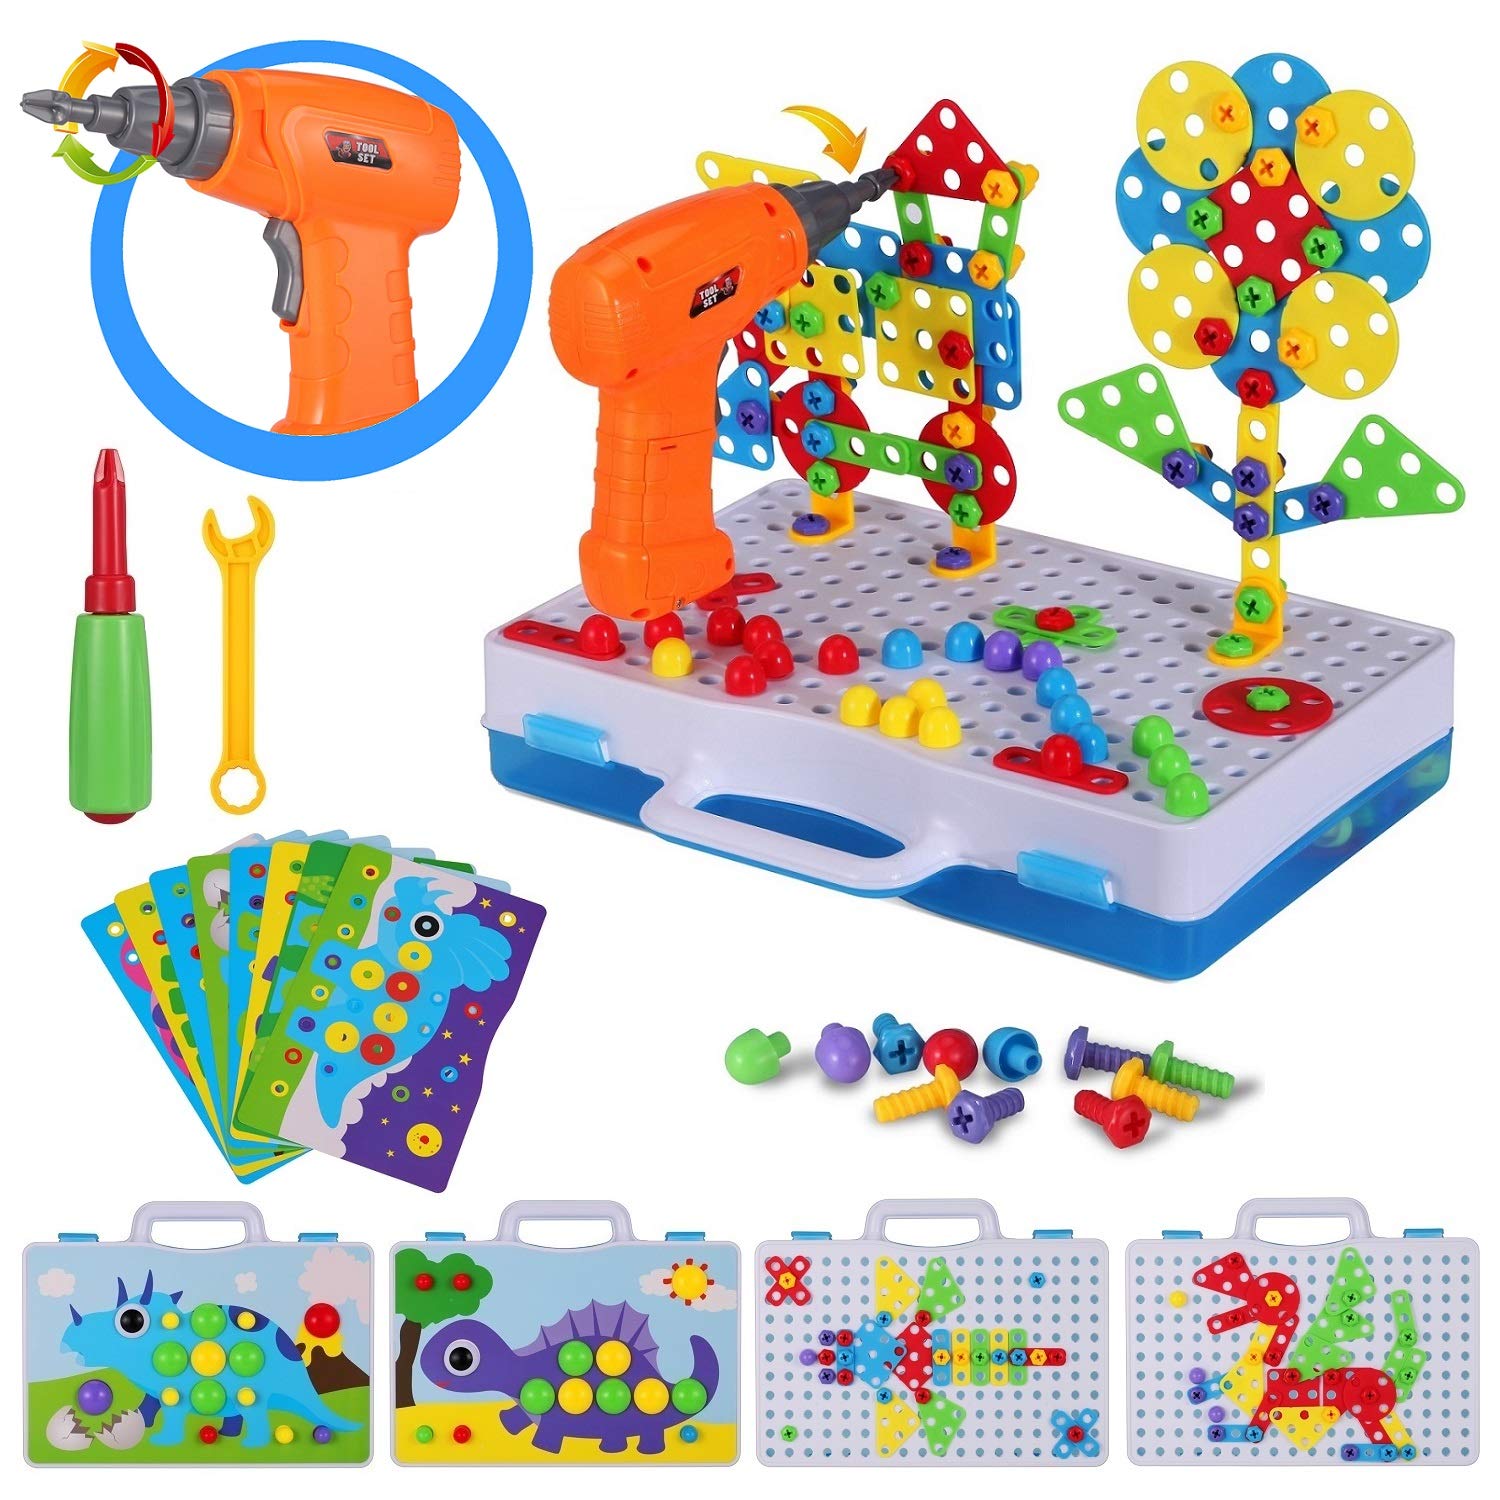 224 Piece STEM Building Toys for Kids 4 5 6 7 8 Year Old, Trendy Bits Drill Puzzle with Screwdriver Tool Set, Mosaic Drill Set for Boys and Girls Ages 4-8